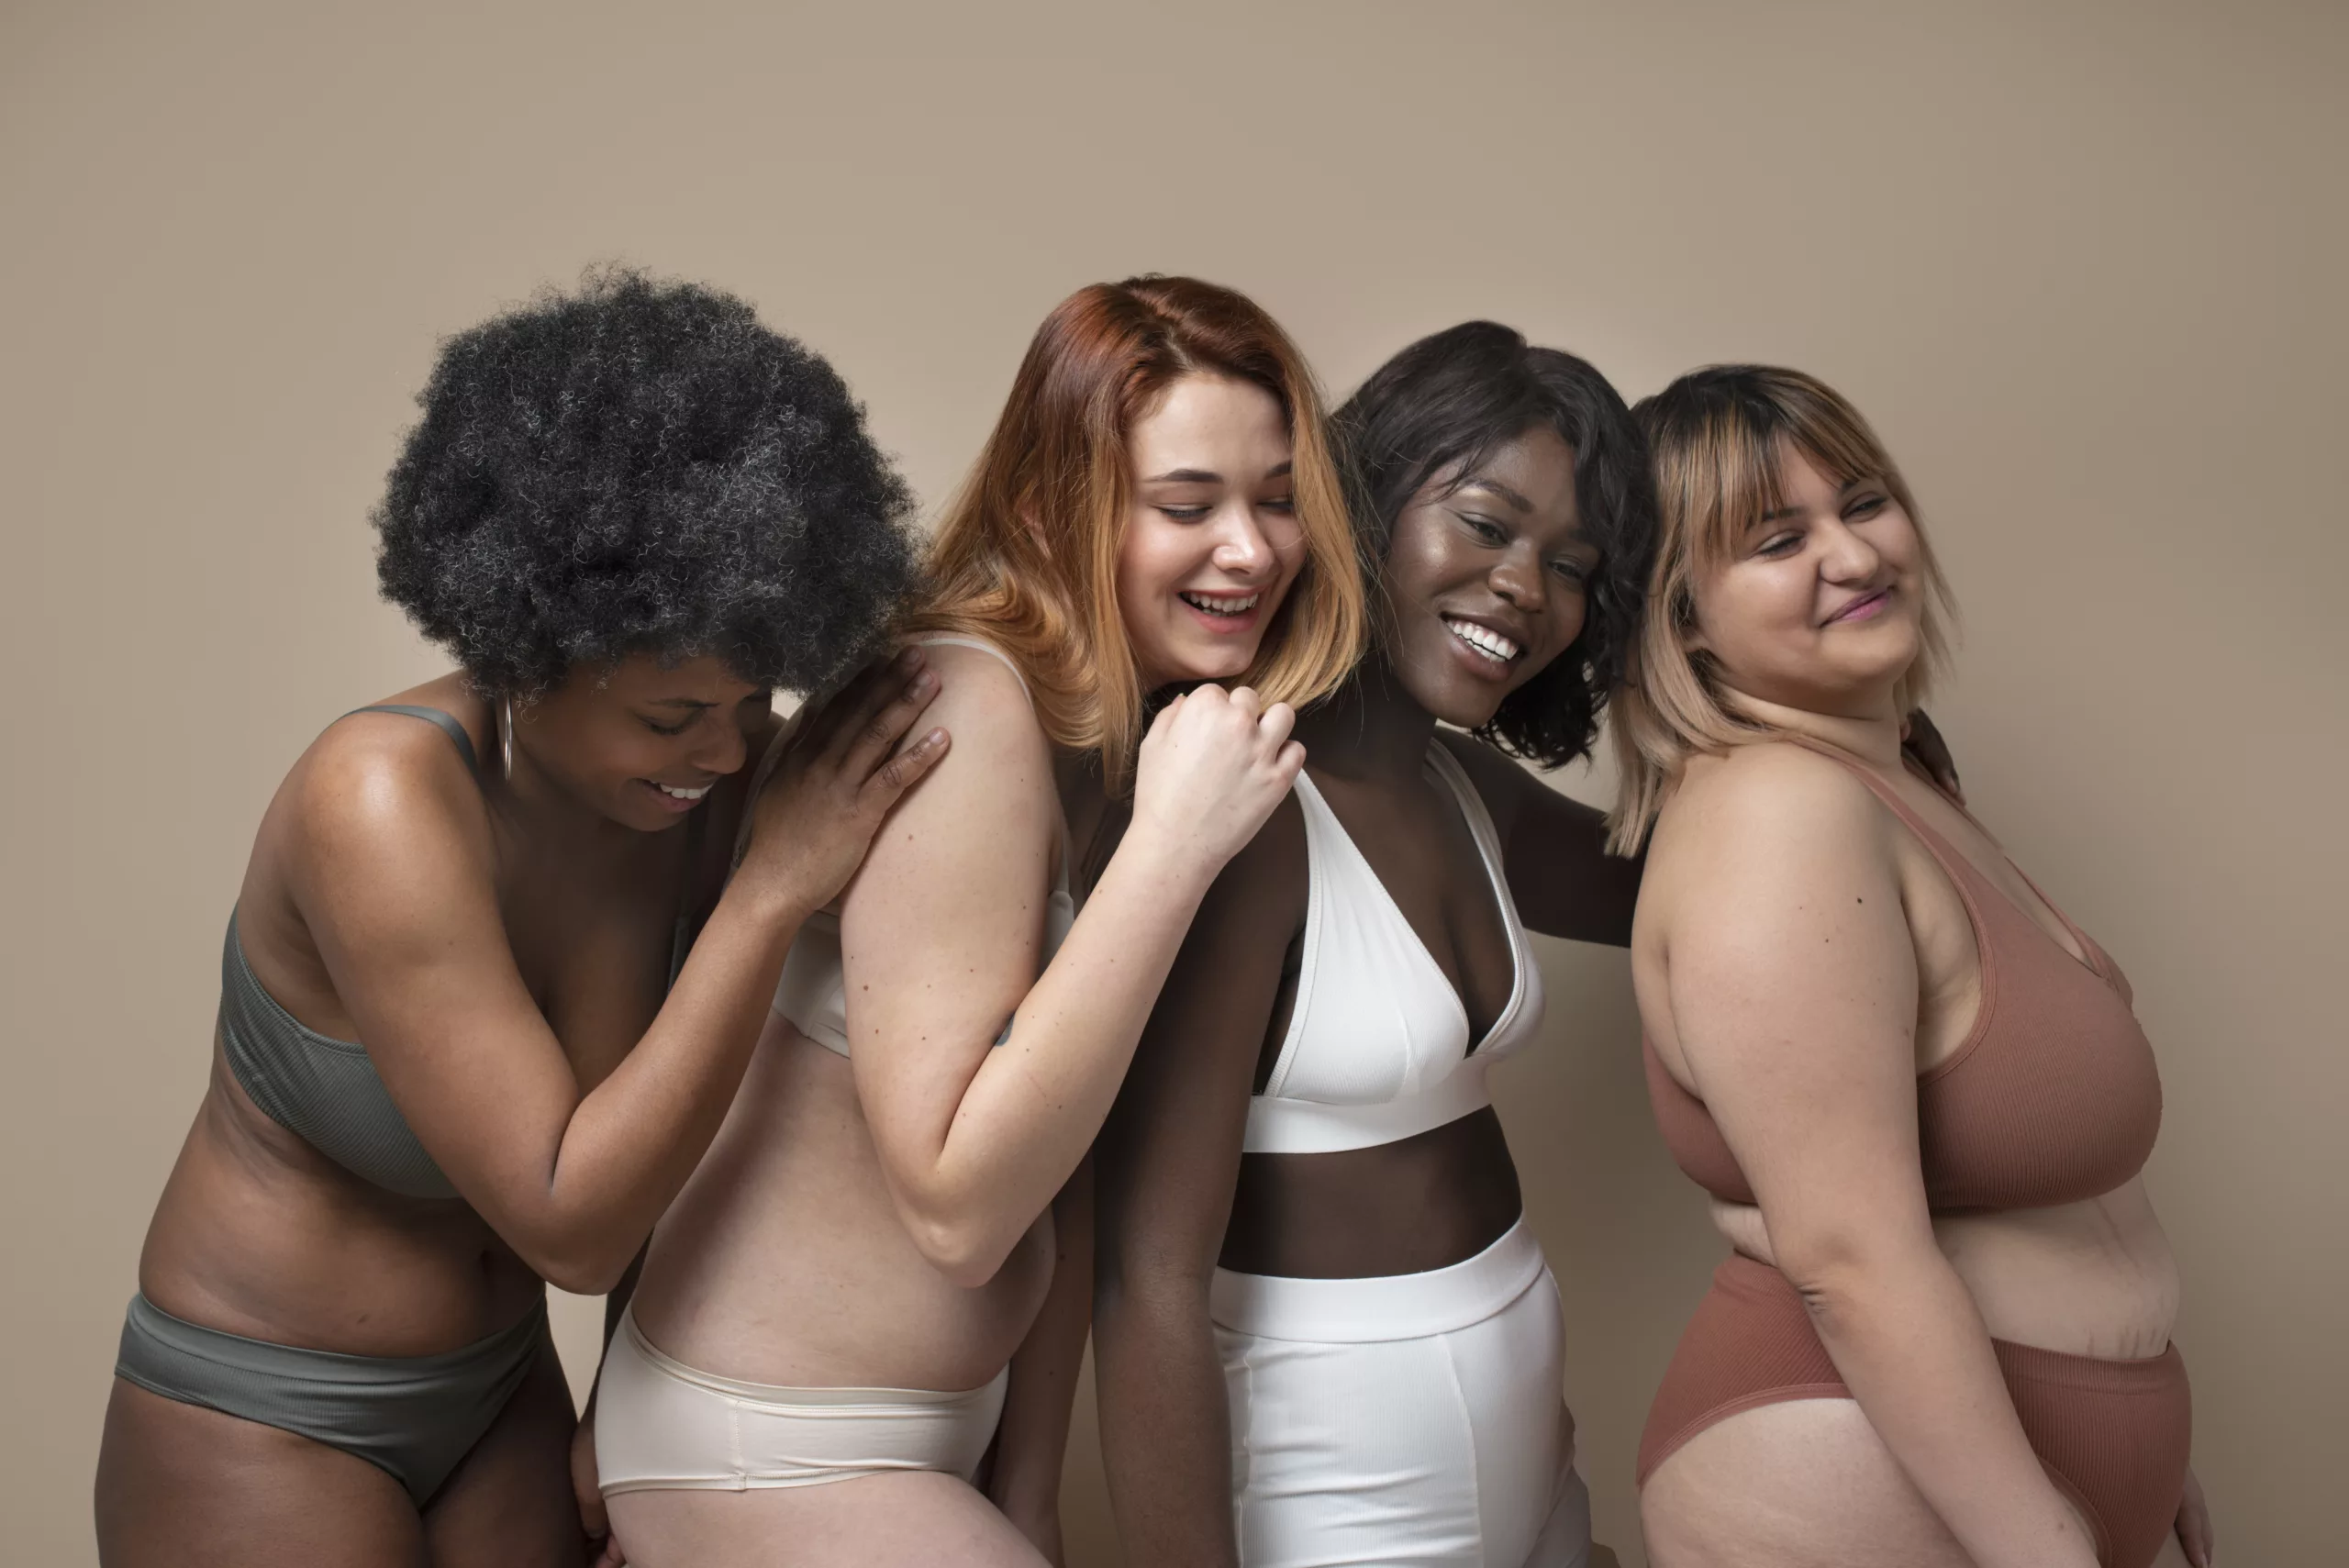 How the body positivity movement in marketing is advocating for inclusion over idealism